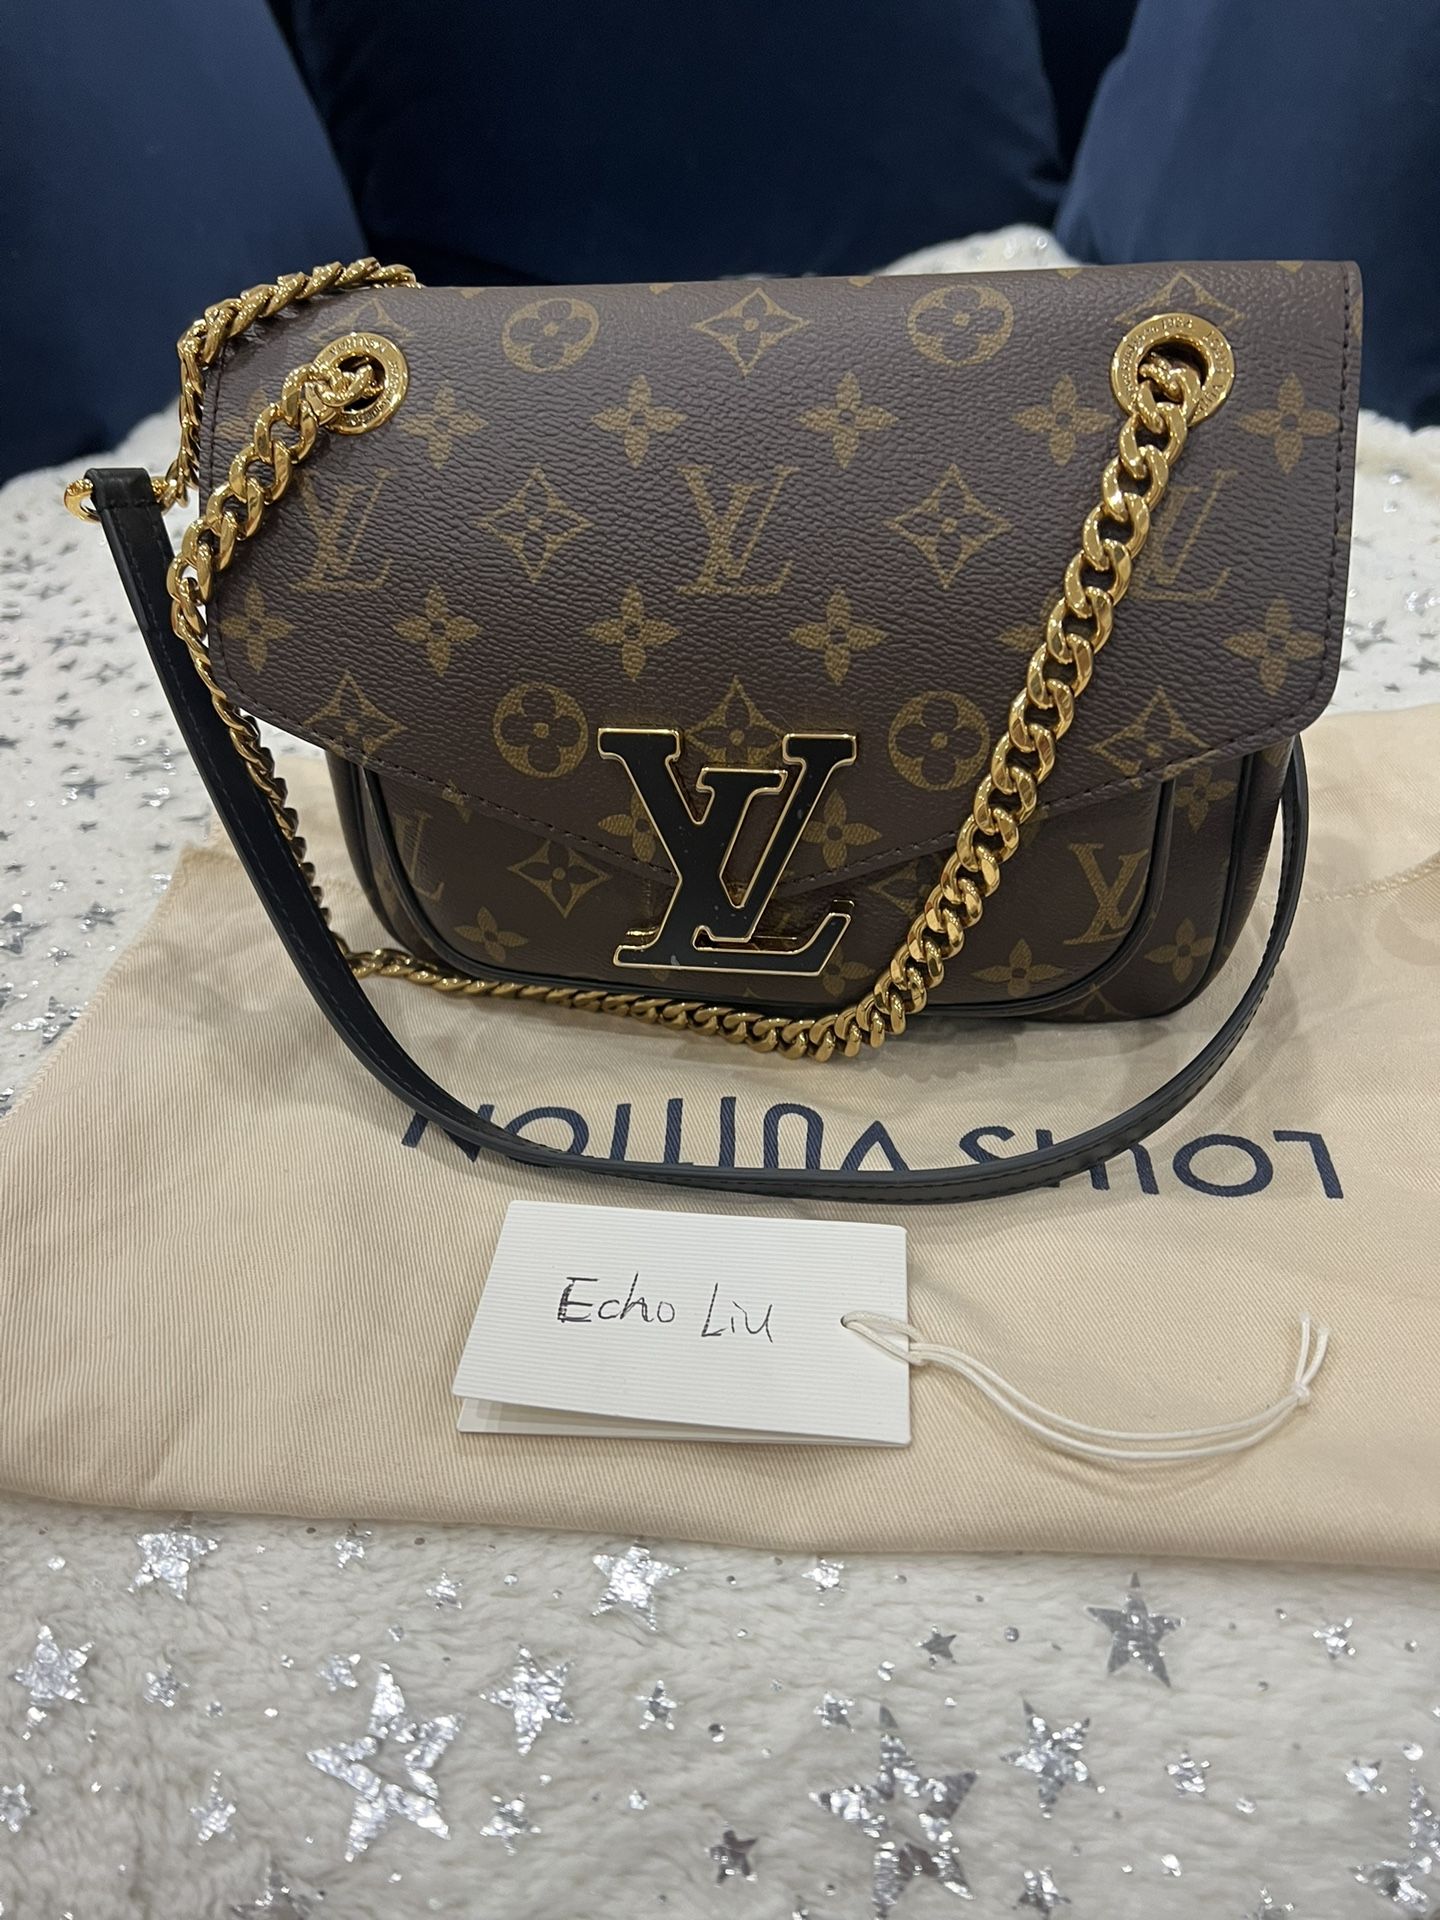 Louis Vuitton Lv Pont 9 Soft MM Bags for Sale in Rialto, CA - OfferUp